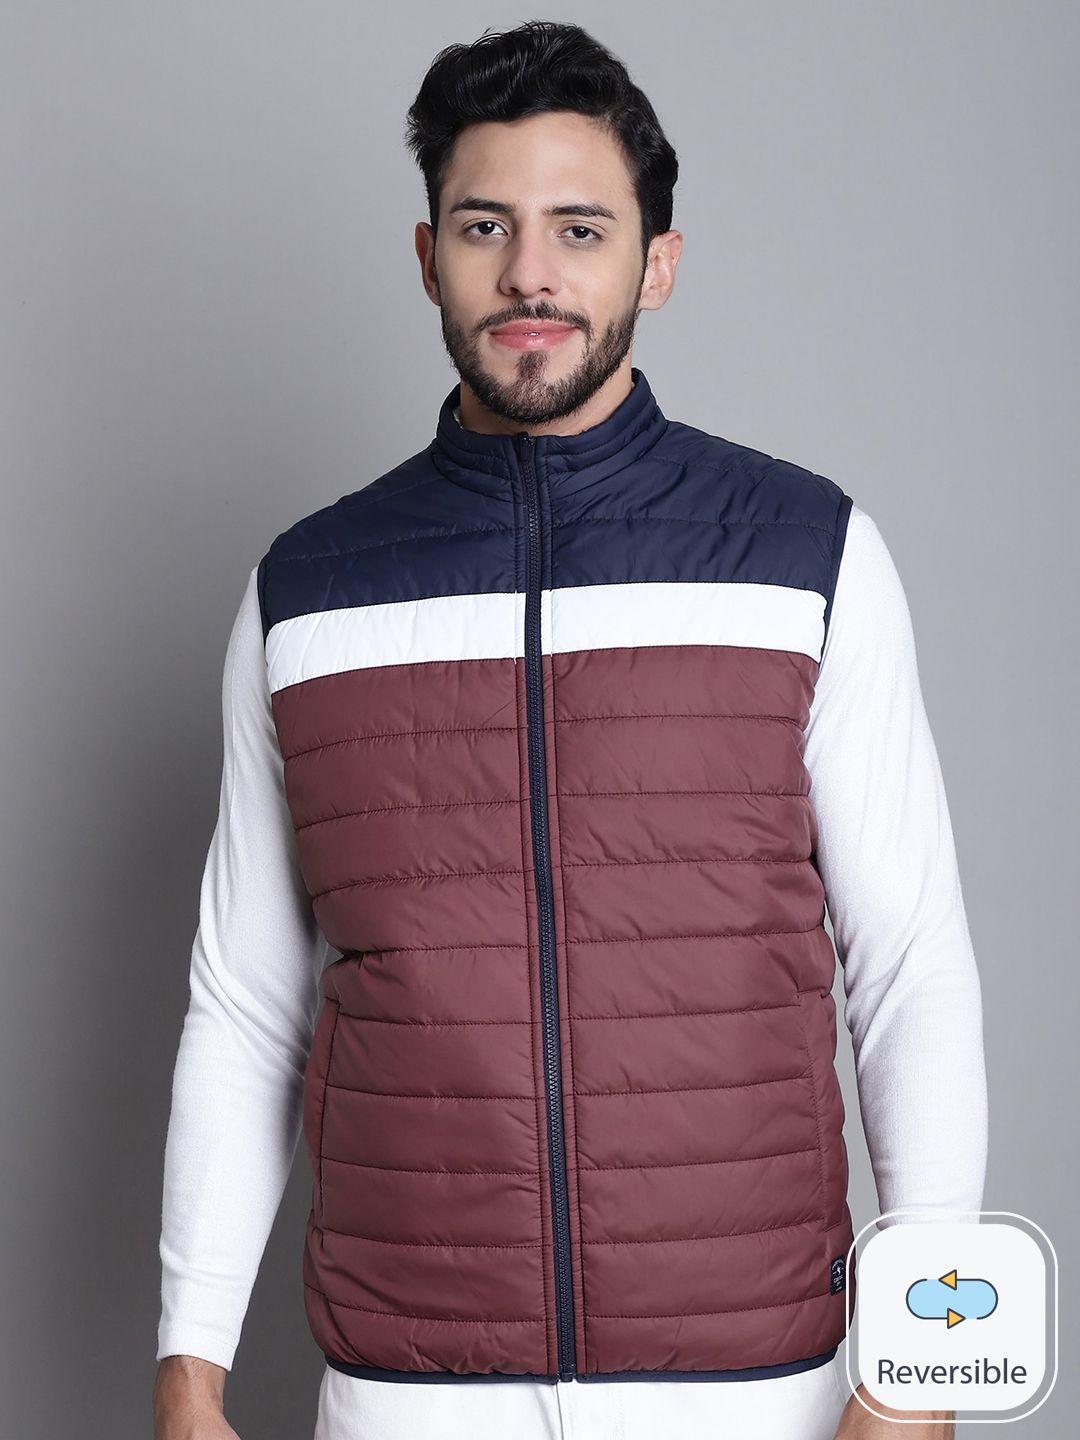 cantabil-colourblocked-reversible-bomber-jacket-with-zip-detail